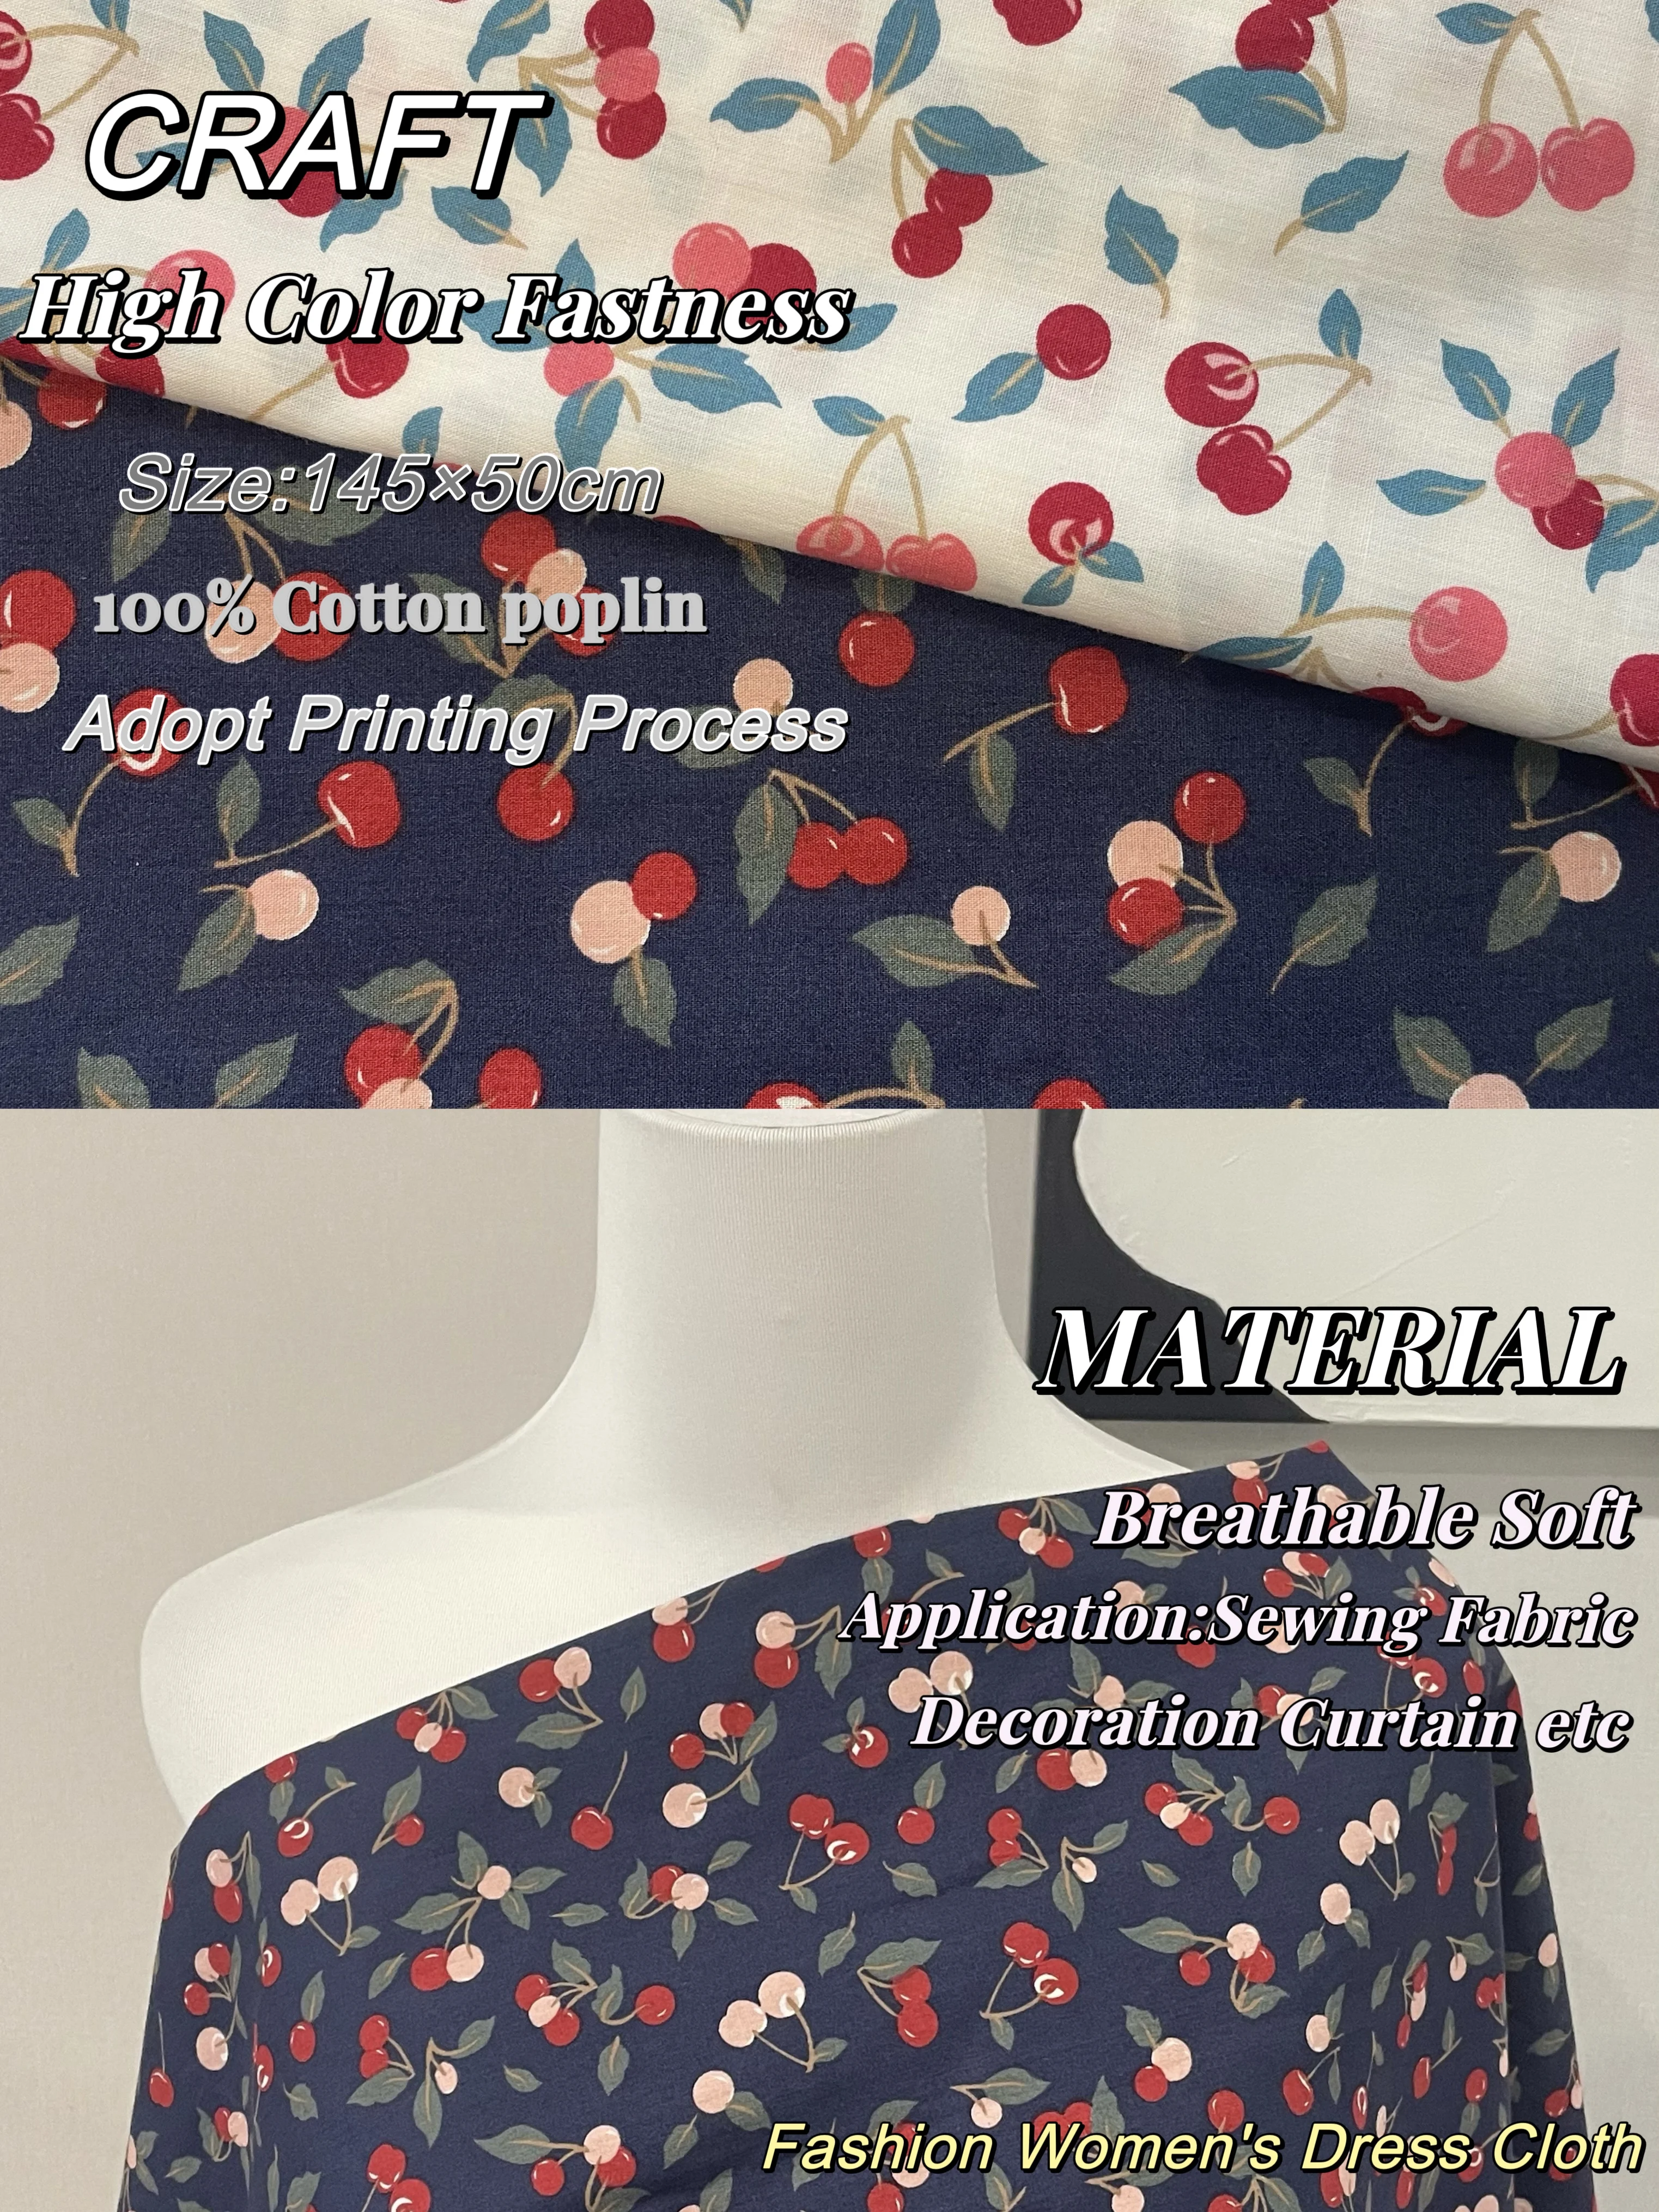 145×50cm fruit cherry 40s tissun liberty cotton fabric for kids baby sewing cloth dresses skirt diy handmade poplin patchwork 145×50cm Fruit Cherry 40S Tissun Liberty Cotton Fabric For Kids Baby Sewing Cloth Dresses Skirt DIY Handmade Poplin Patchwork